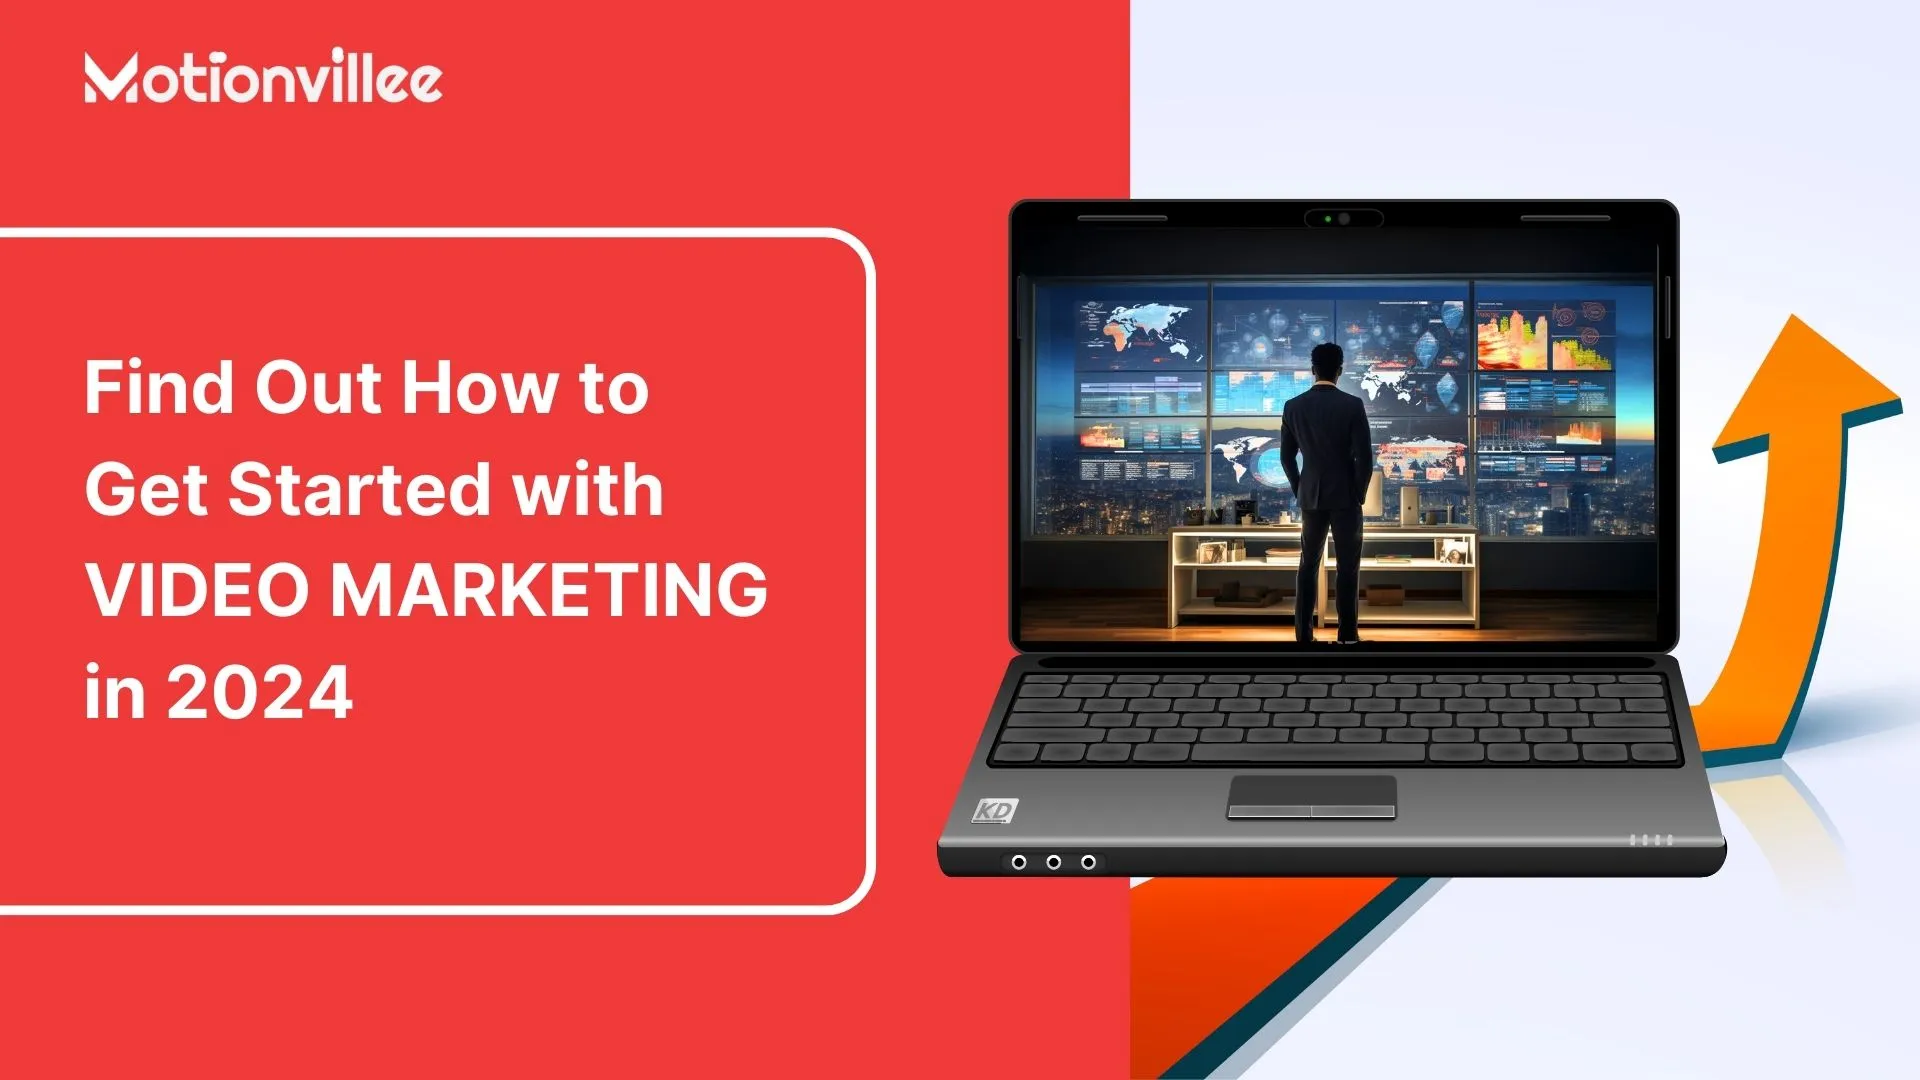 How to get started with video marketing